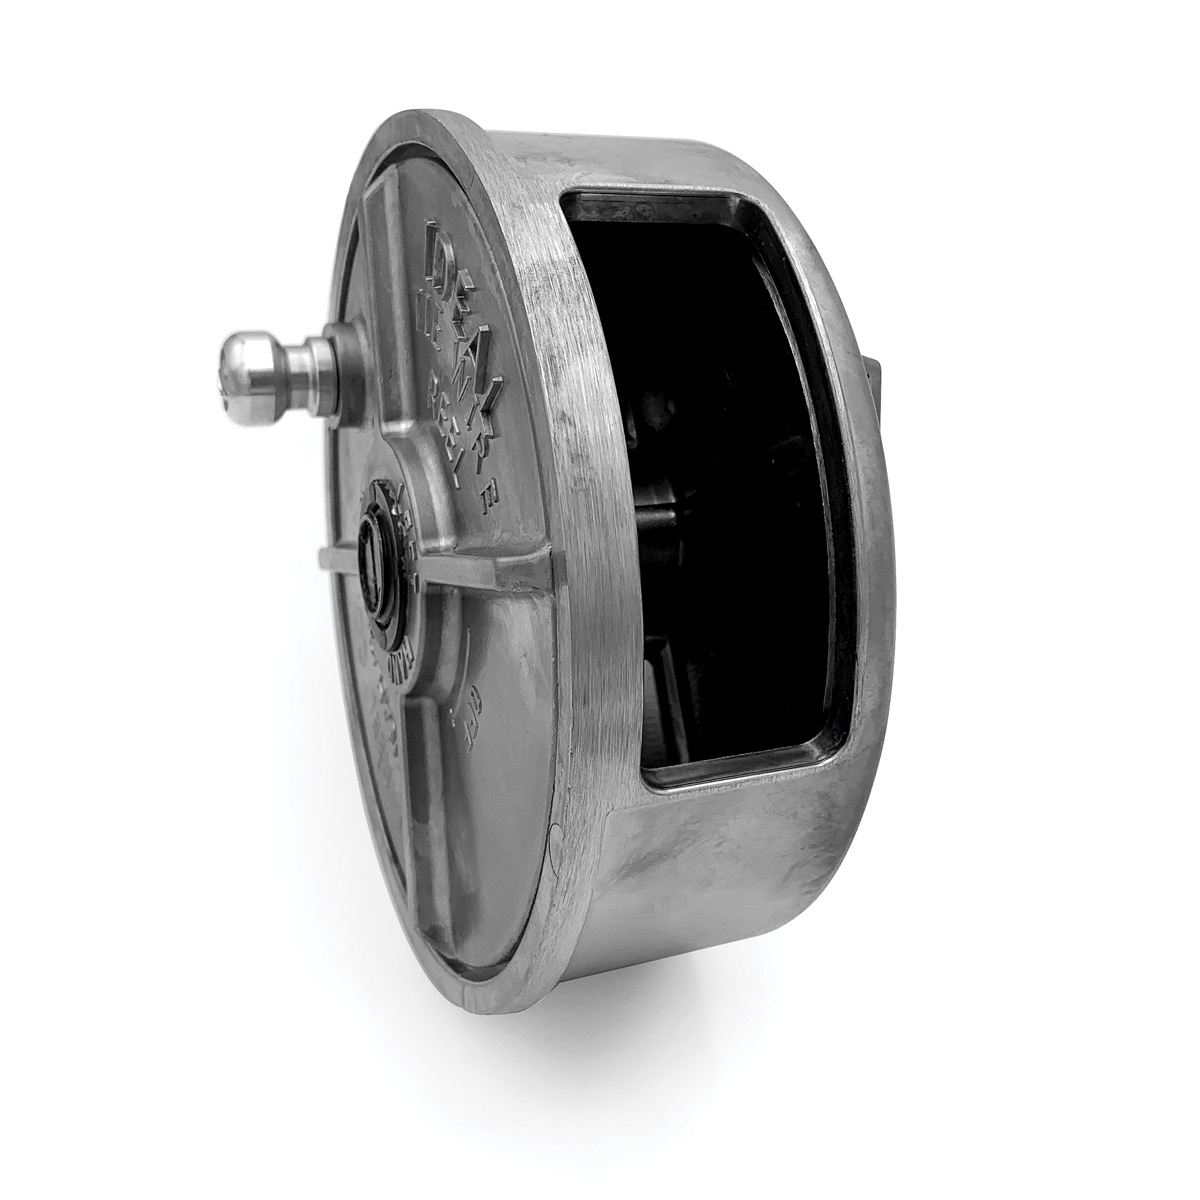 The true original Tie Wire Reel. Efficient and compact, ideally designed for rewound coils as the Ideal Reel’s dispenser center hole is rectangular with rounded corners supporting the quick reversing of the roll for right- or left-handed users. Features a